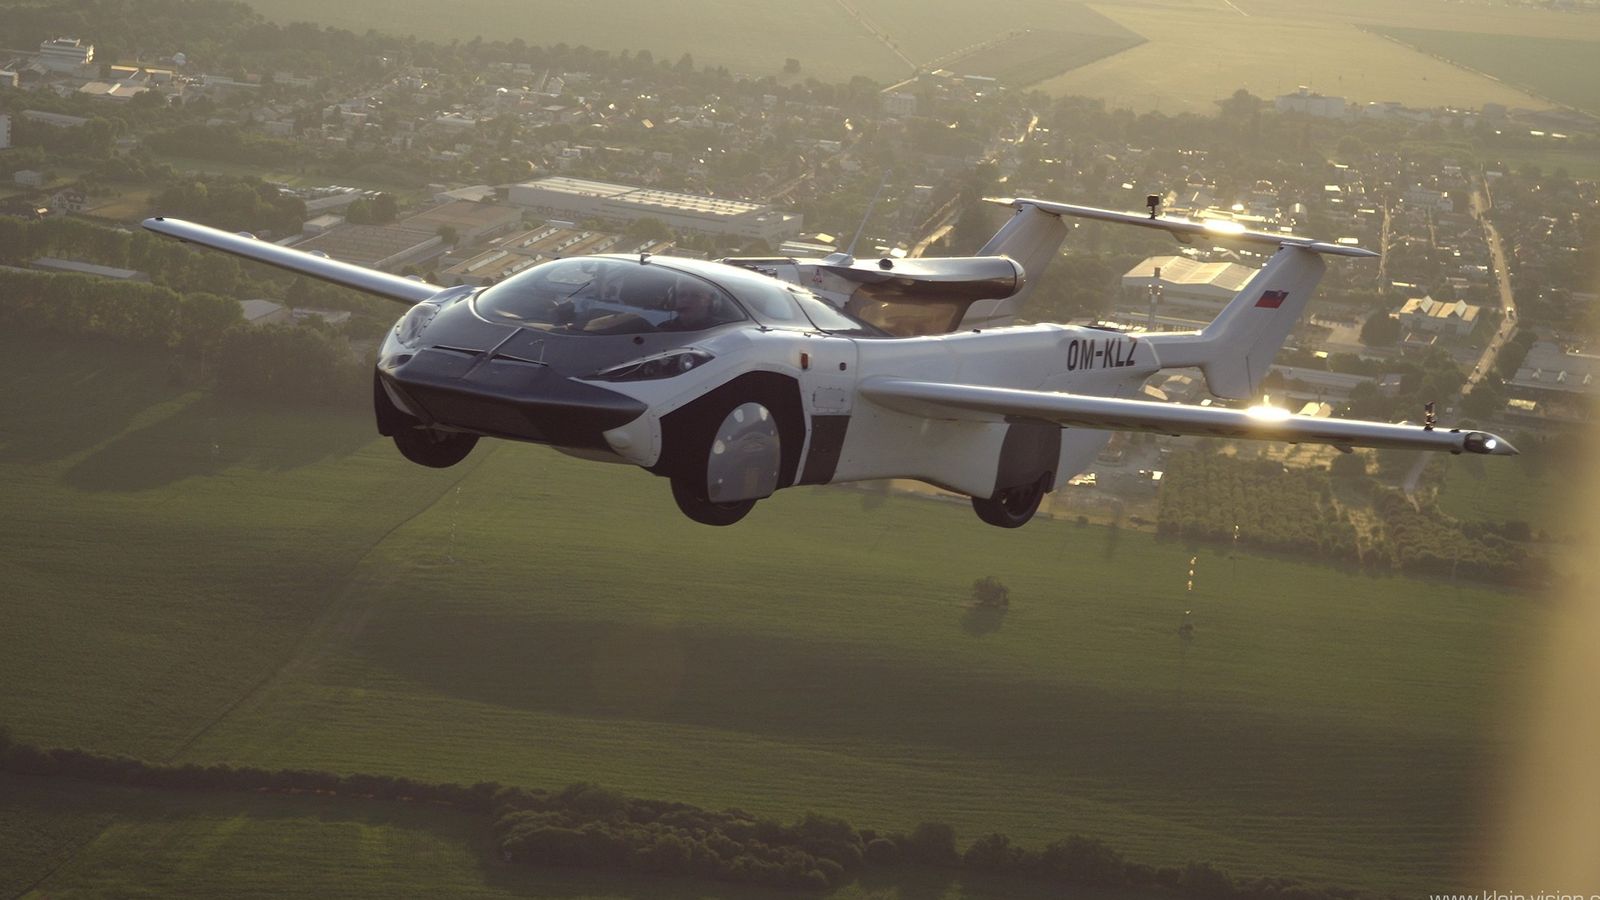 'AirCar': Dual-mode vehicle that can transform from a car into a plane is certified to fly after passing tests in Slovakia